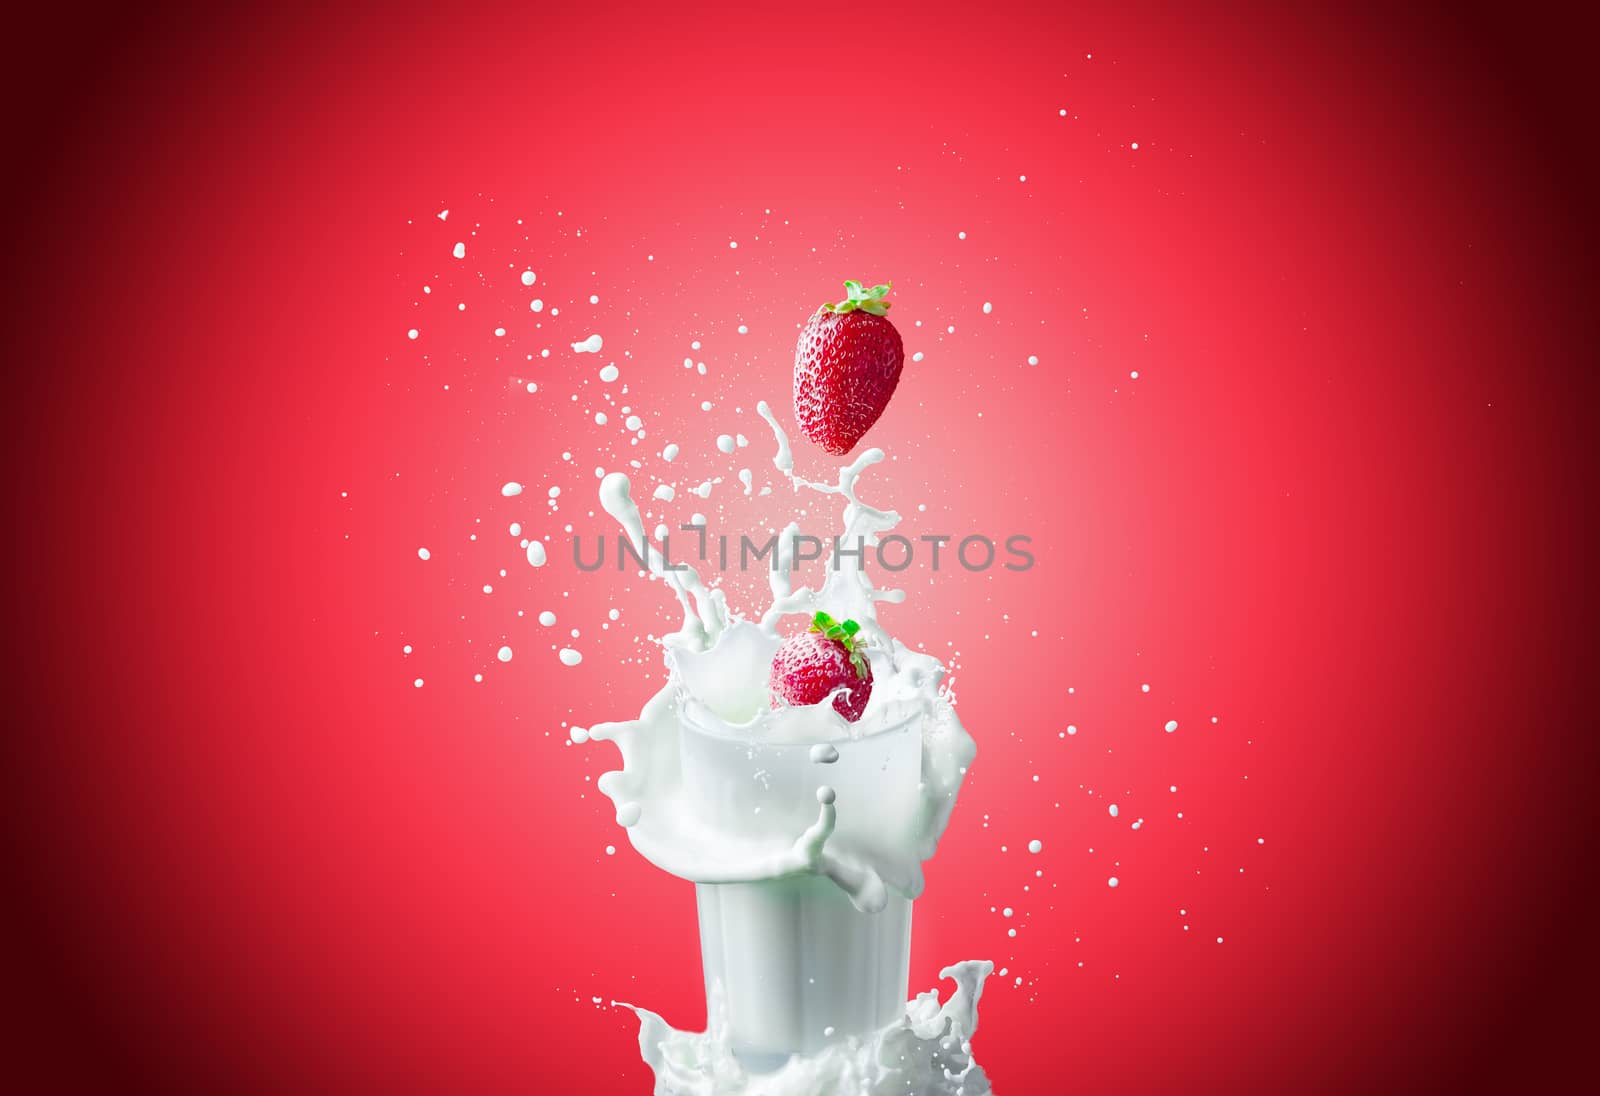 View of nice fresh red strawberry falling down in to the glass milk making a big splash on a red background